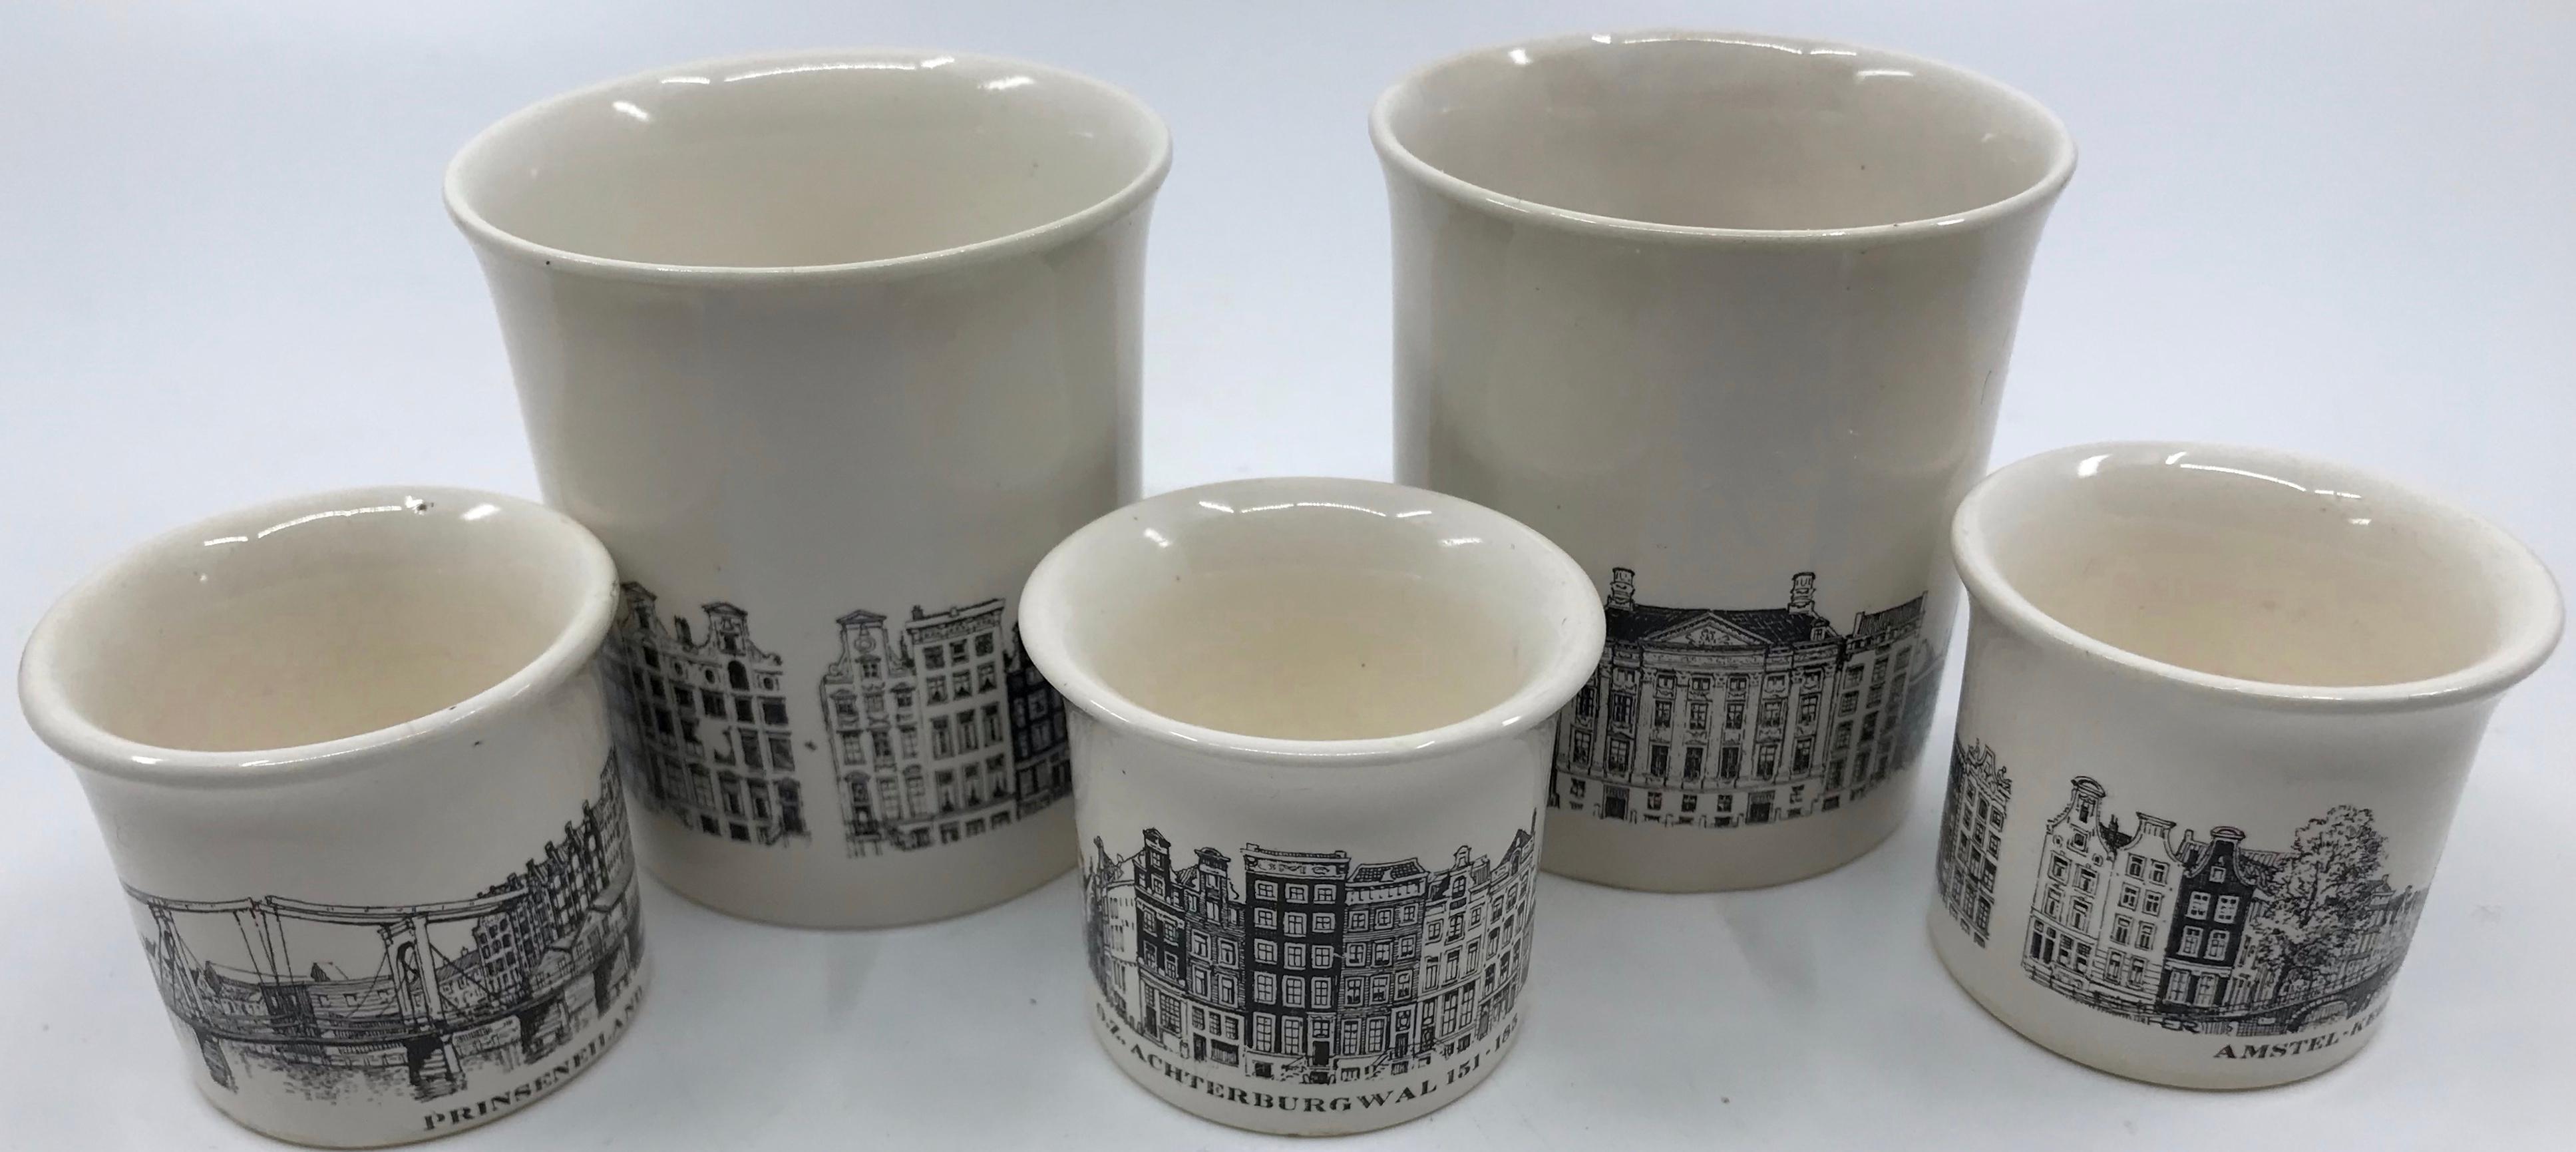 Luxembourg coffee cans. Vintage Villeroy & Boch black and white ceramic pair coffee cups and three espresso cups. Handsome black and white design with place names for the Continental coffee buff. Luxembourg, Mid-20th century
Dimensions: Pair coffee